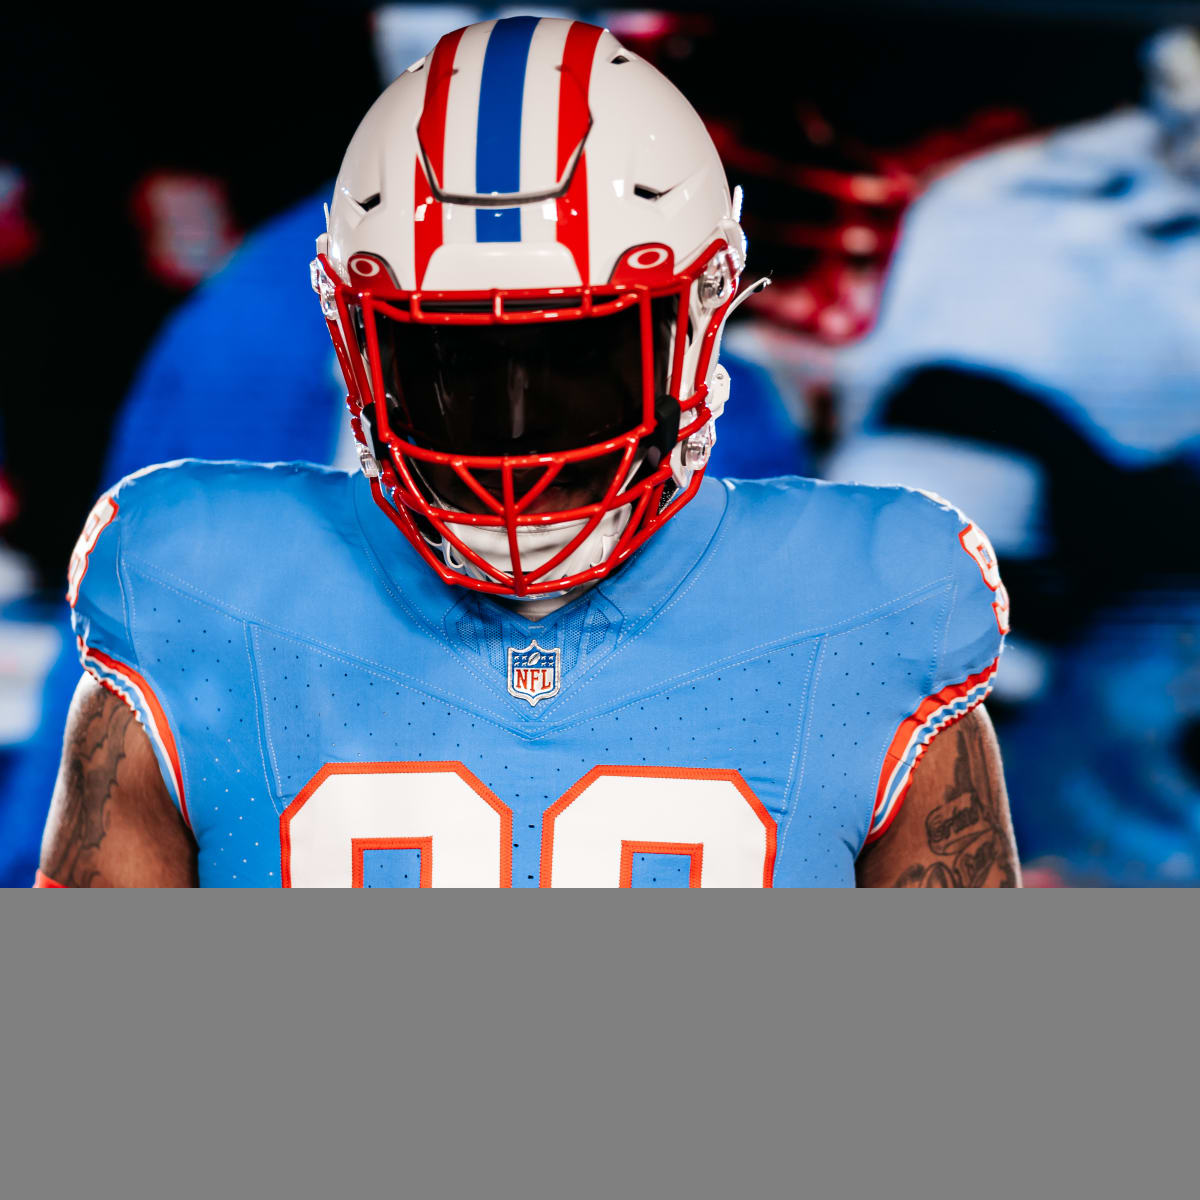 Houston still owns scoreboard despite obvious slap in the face(mask) with  Tennessee Titans' Luv Ya Blue uniforms - CultureMap Houston